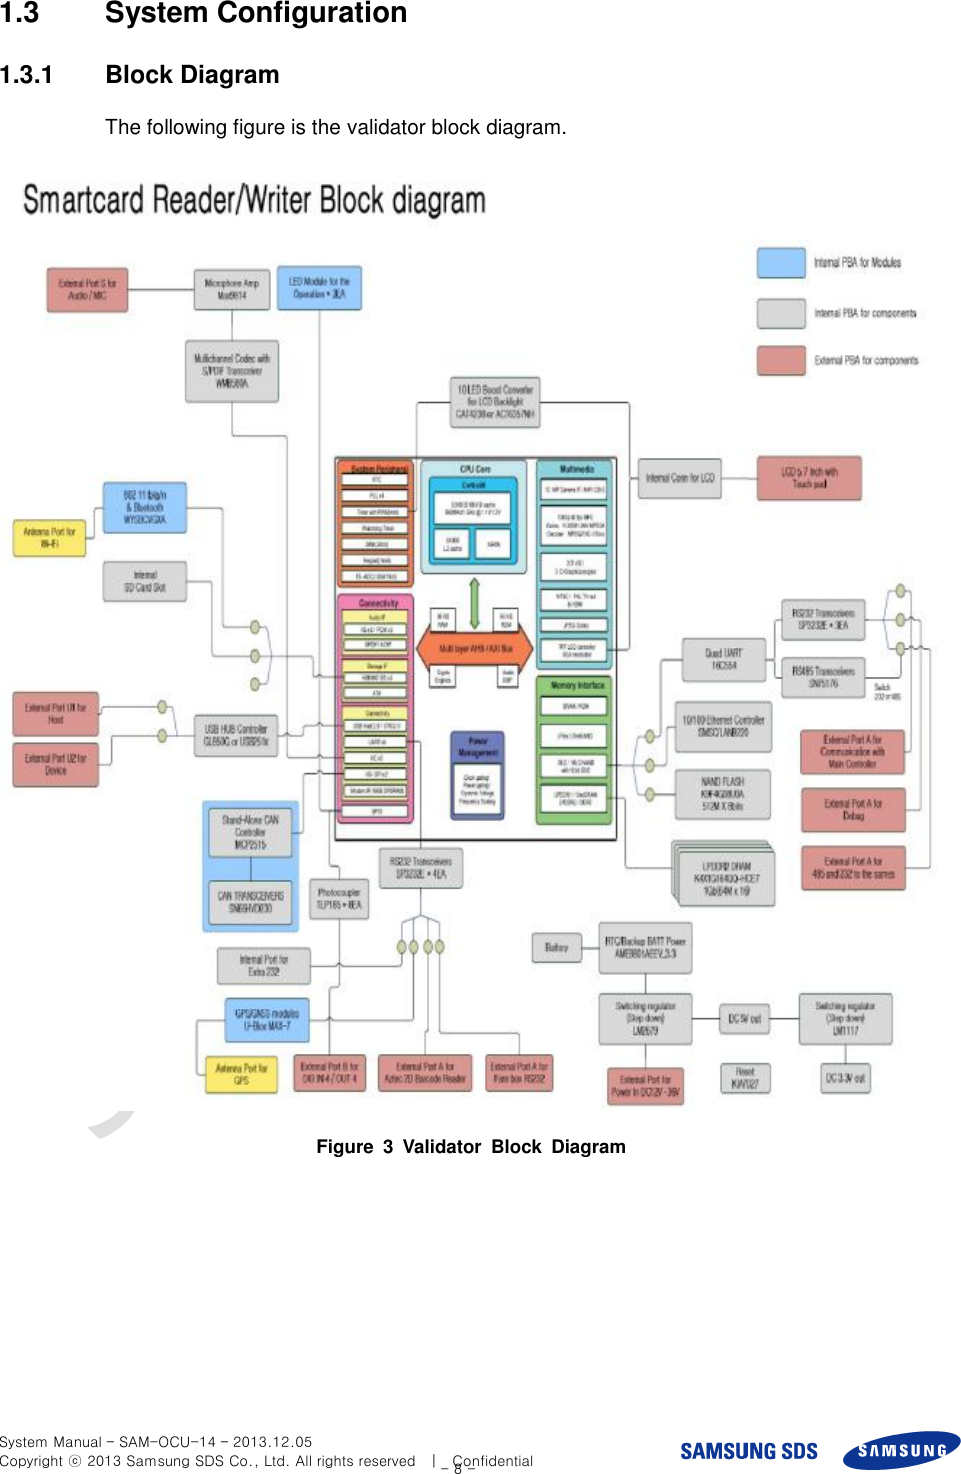  System Manual – SAM-OCU-14 – 2013.12.05 Copyright ⓒ 2013 Samsung SDS Co., Ltd. All rights reserved    |    Confidential - 8 - 1.3  System Configuration 1.3.1  Block Diagram The following figure is the validator block diagram.  Figure  3  Validator  Block  Diagram 